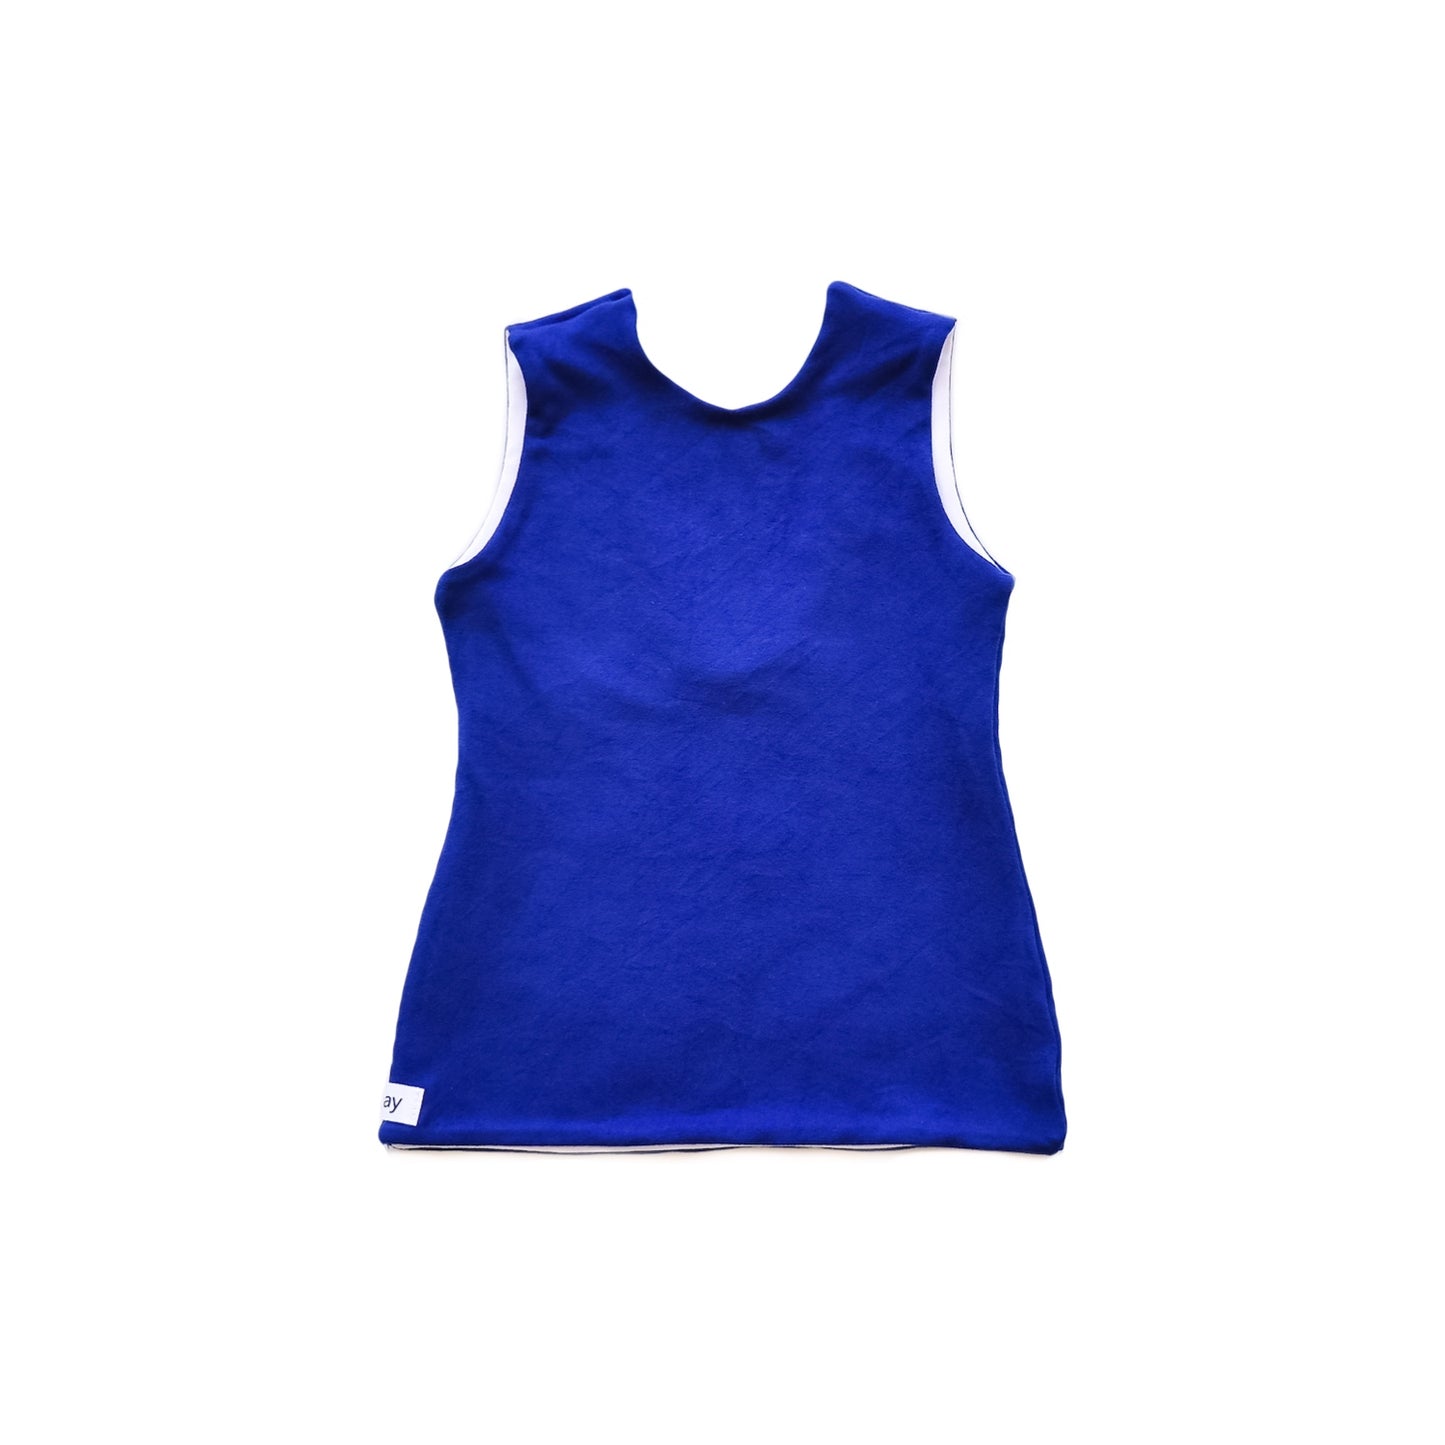 Fitted Top - Blue/White (Reversible)